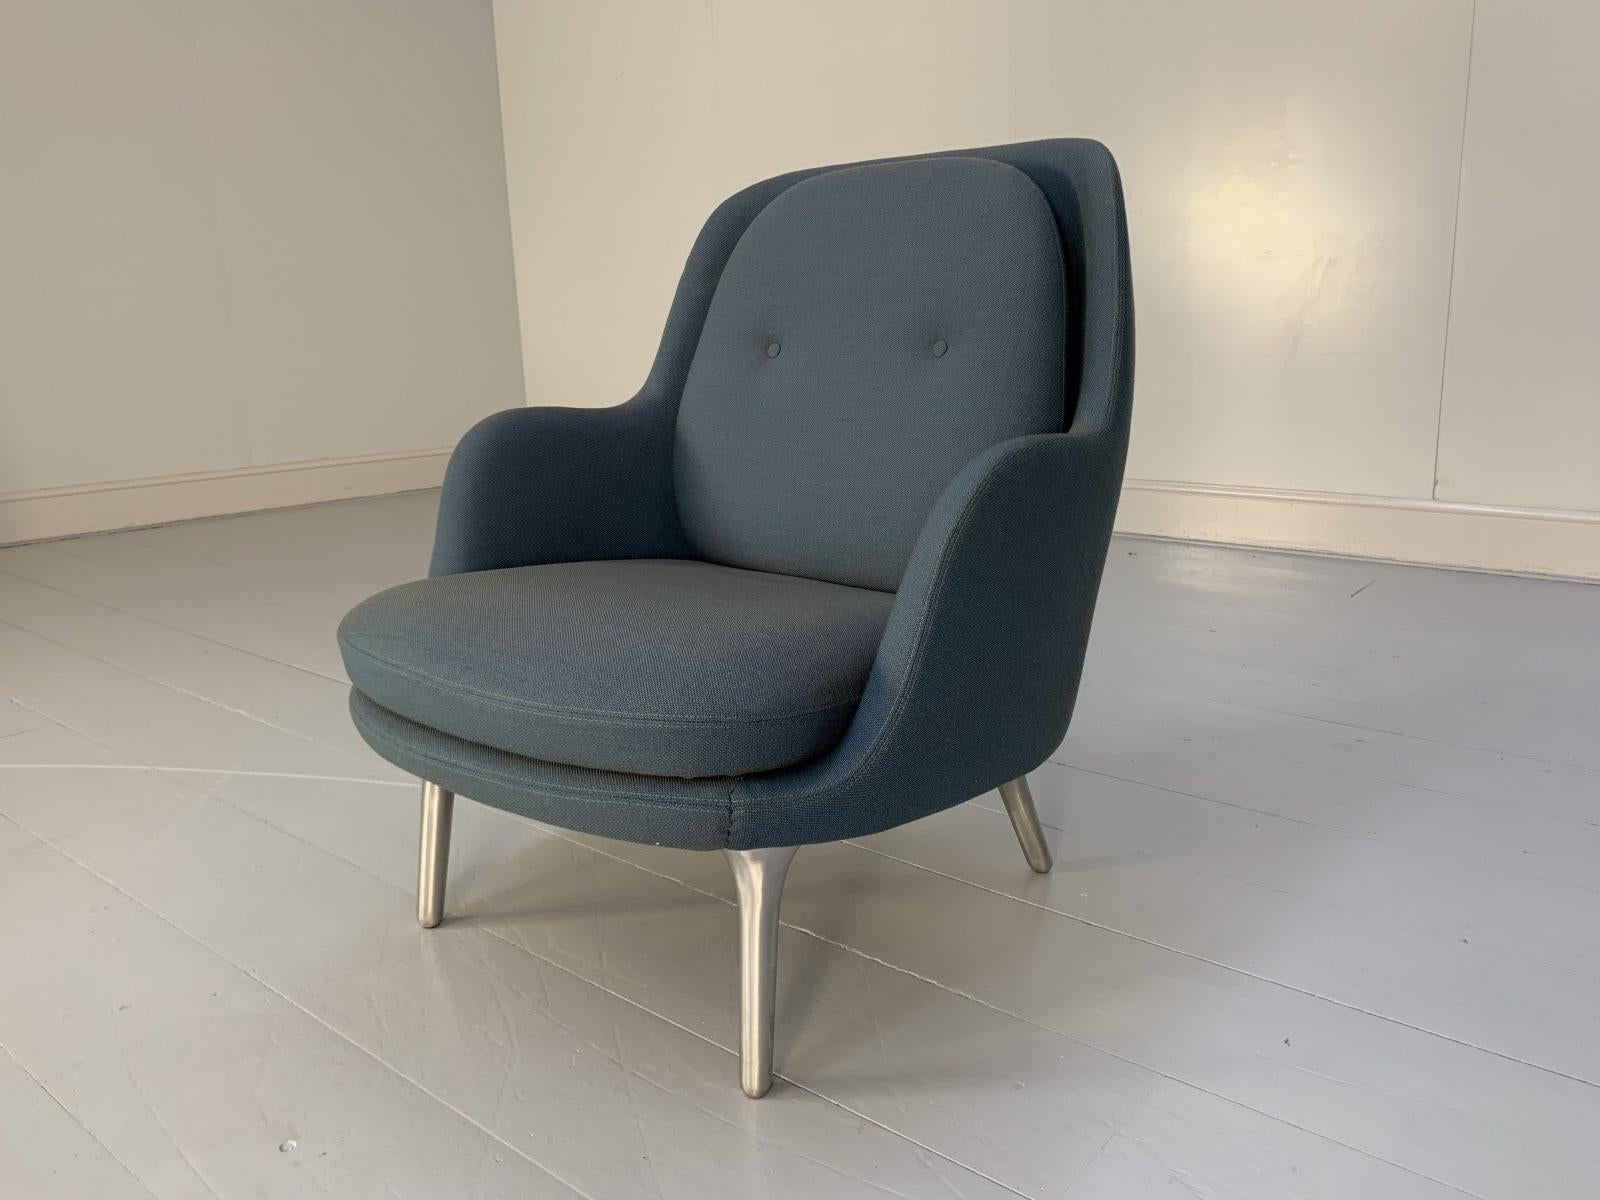 This is a rare example of the iconic “Fri”Armchair, from the world renown Danish furniture house of Fritz Hansen.

In a world of temporary pleasures, Fritz Hansen create beautiful furniture that remains a joy forever.

Dressed in its most